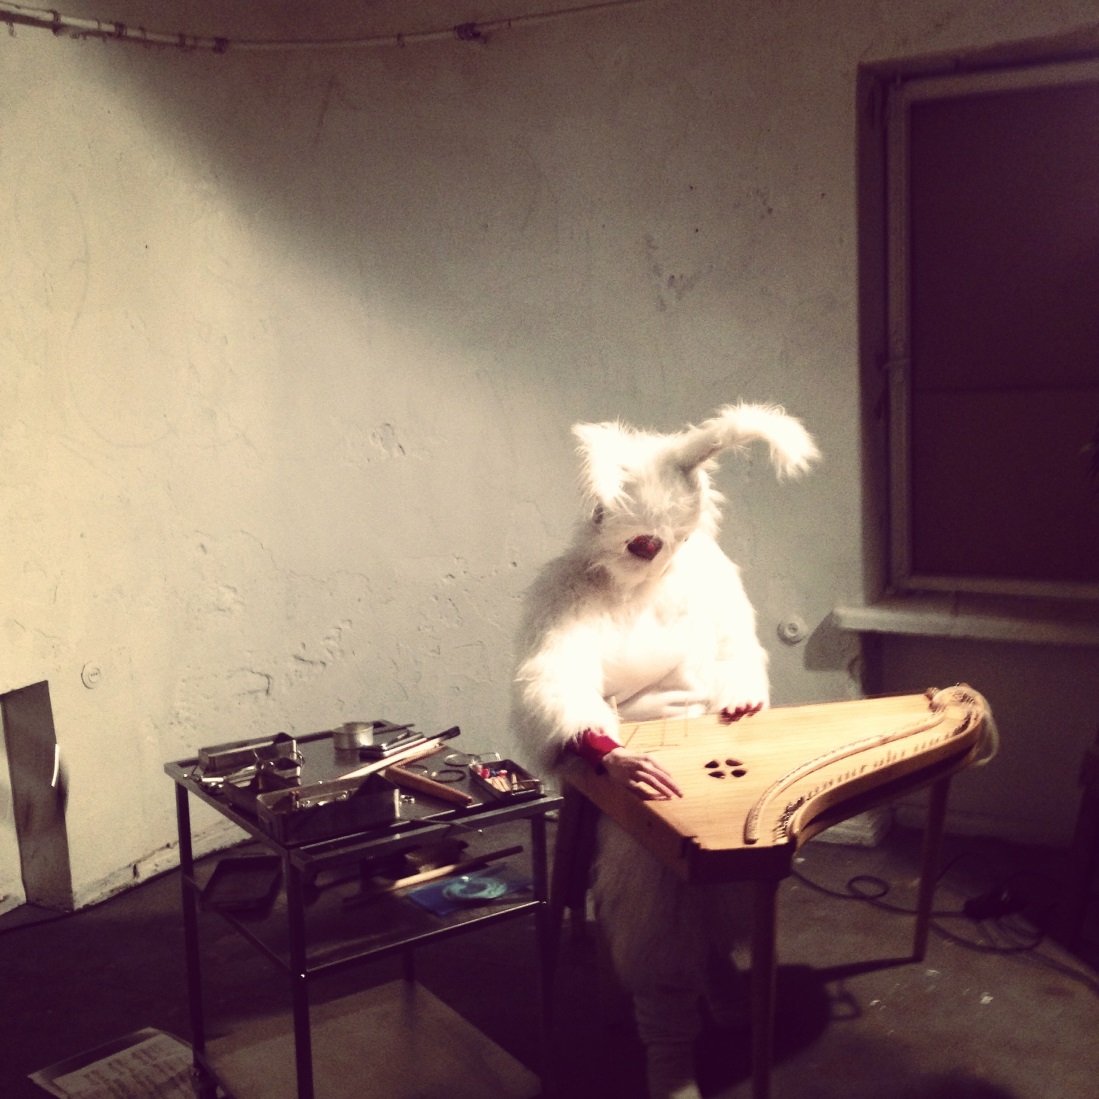 A musician in a bunny suit performing on the traditional Estonian kannel